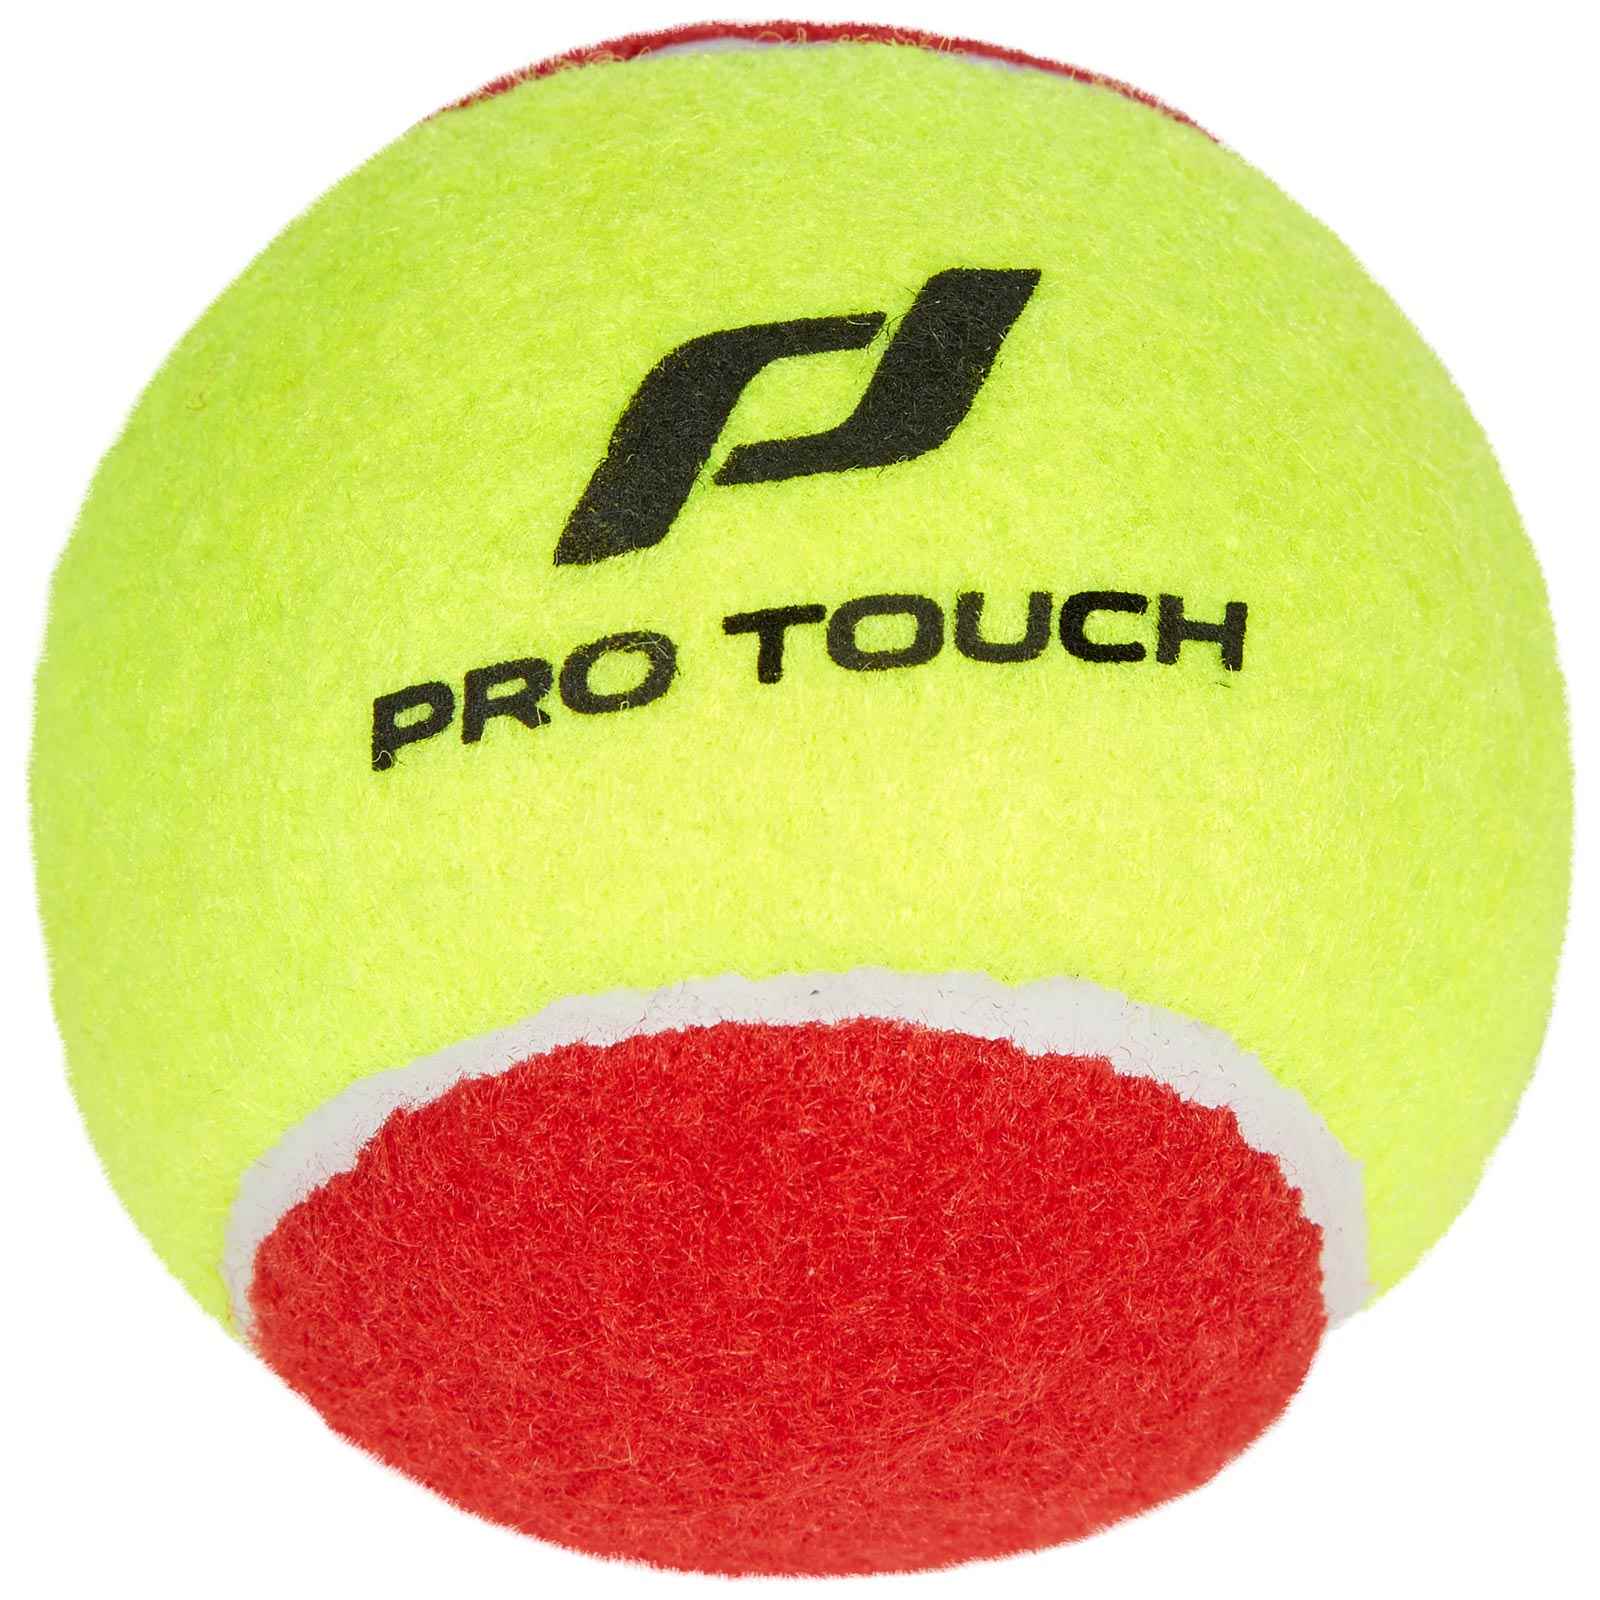 PRO TOUCH ACE 3 TENNIS BALLS - 3 PACK